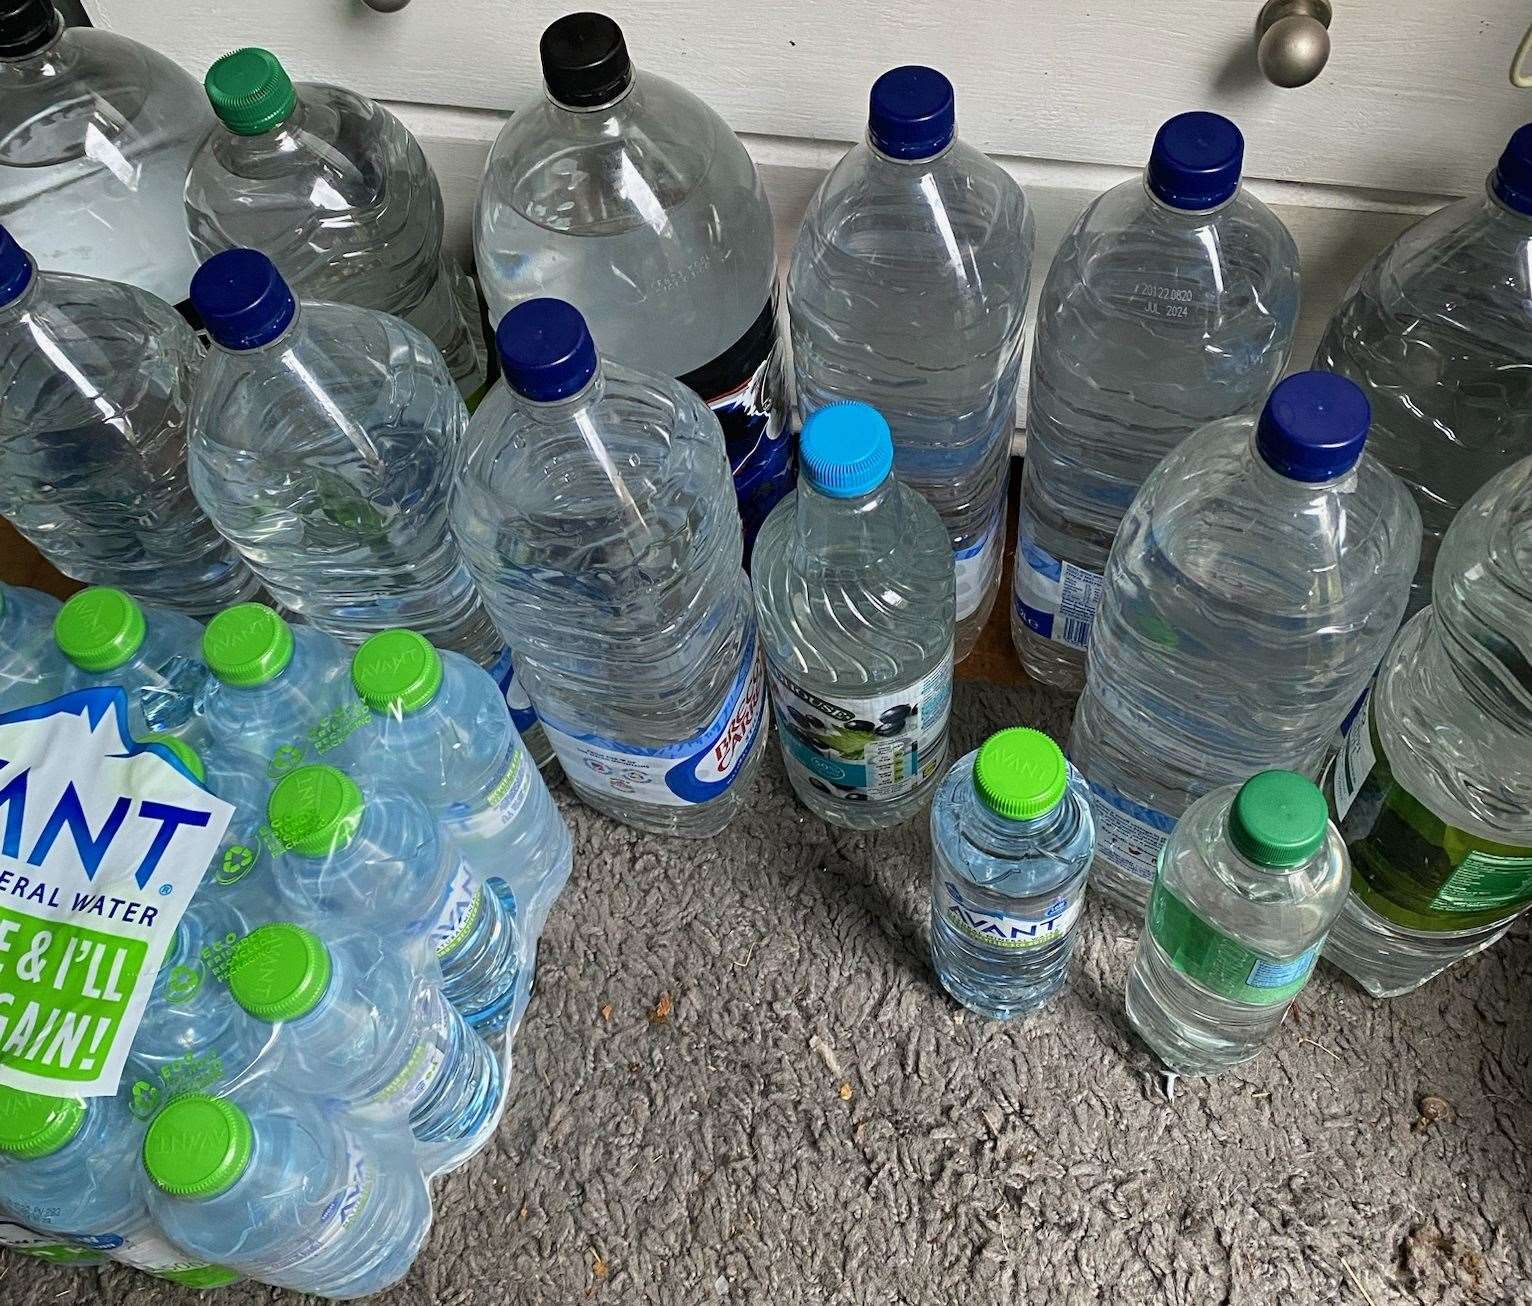 Sharon Hope has collected a number of bottles in case of an emergency. Picture: Sharon Hope